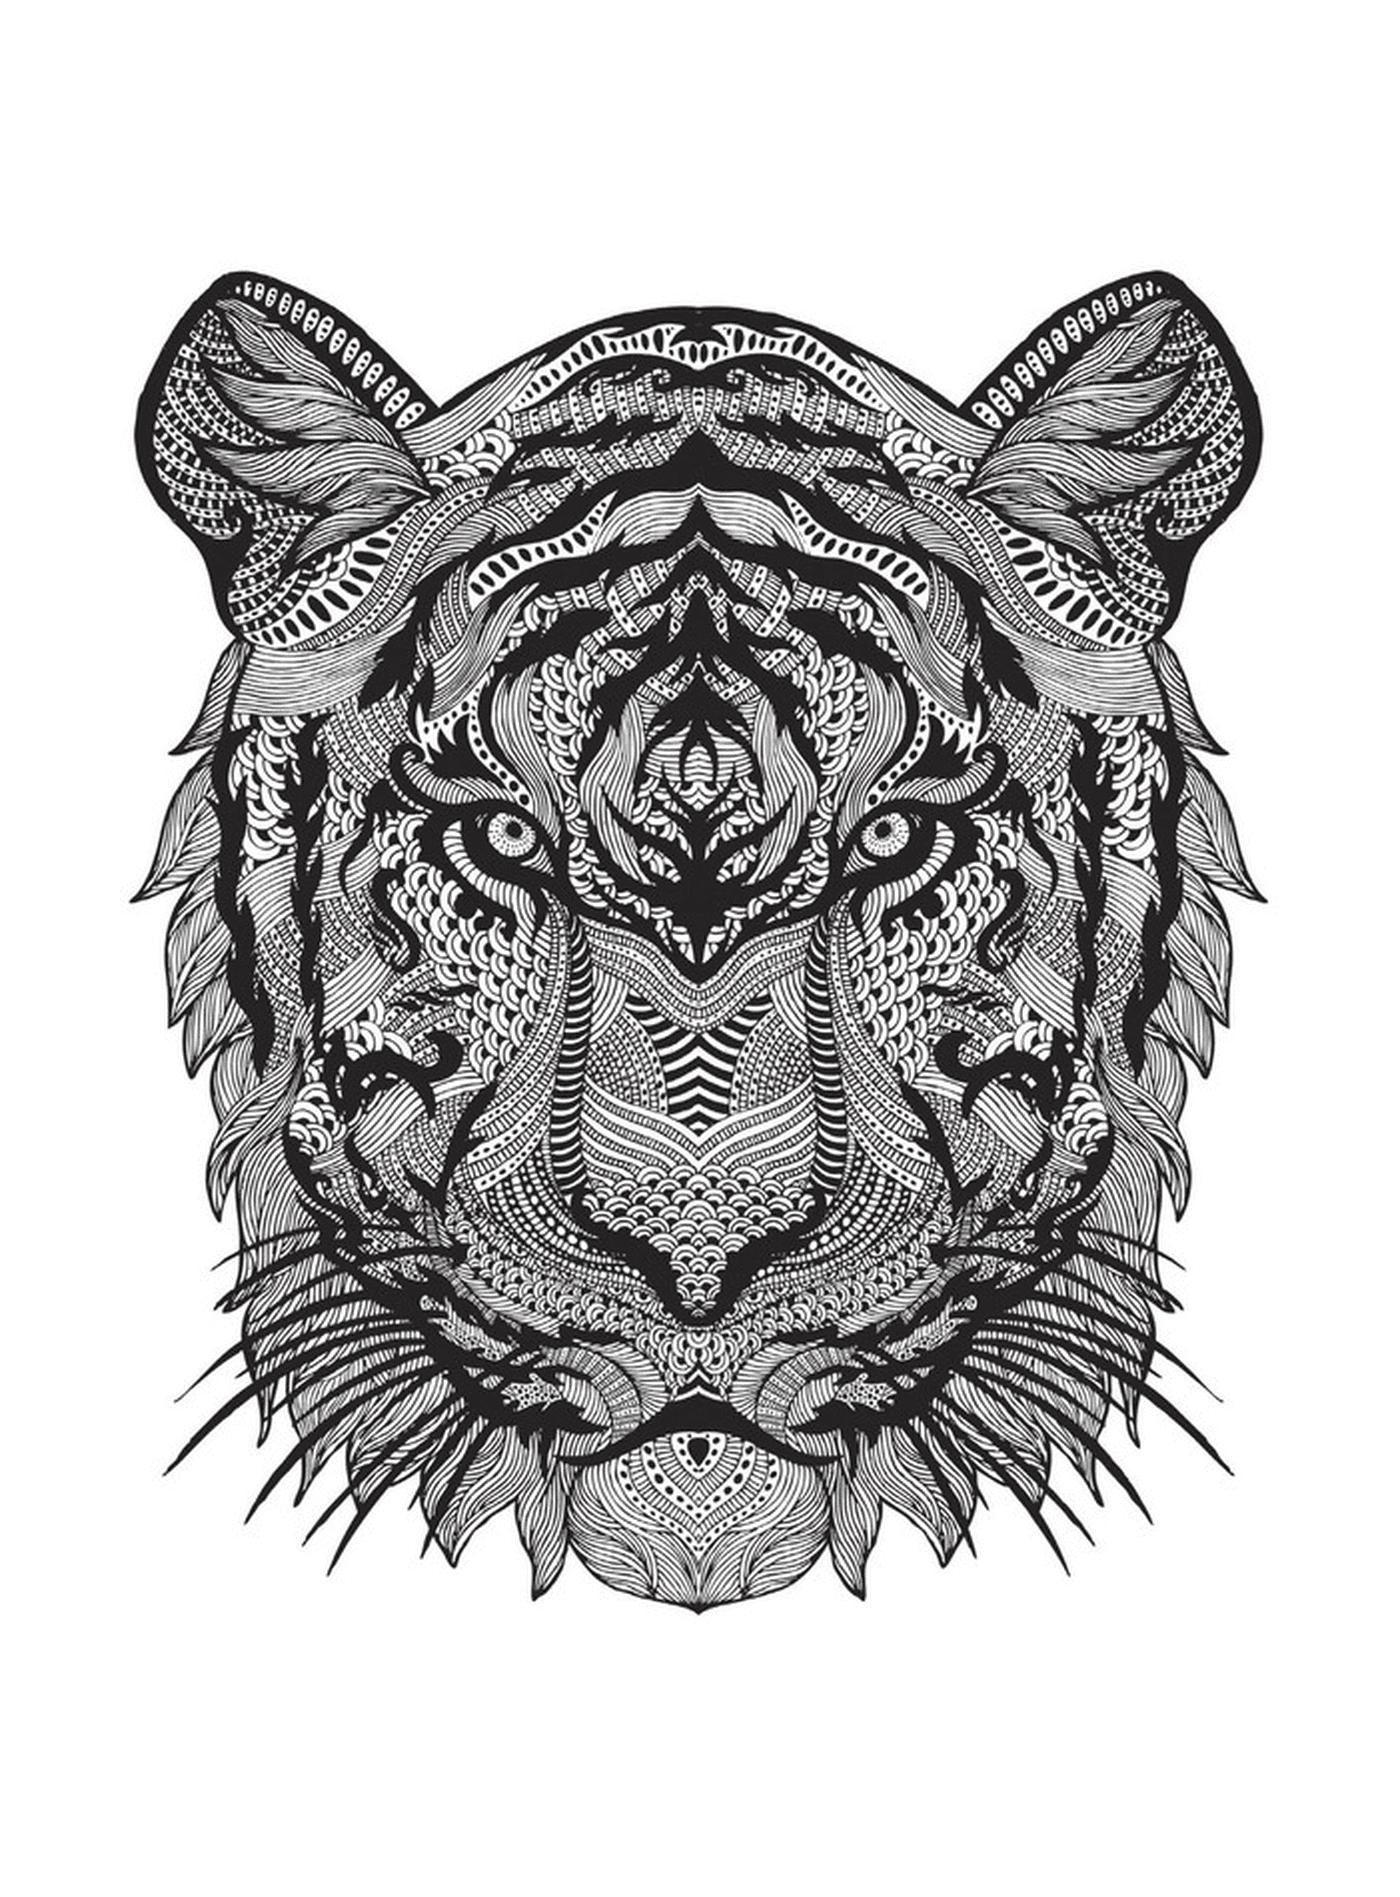  The head of a tiger with mandalas 